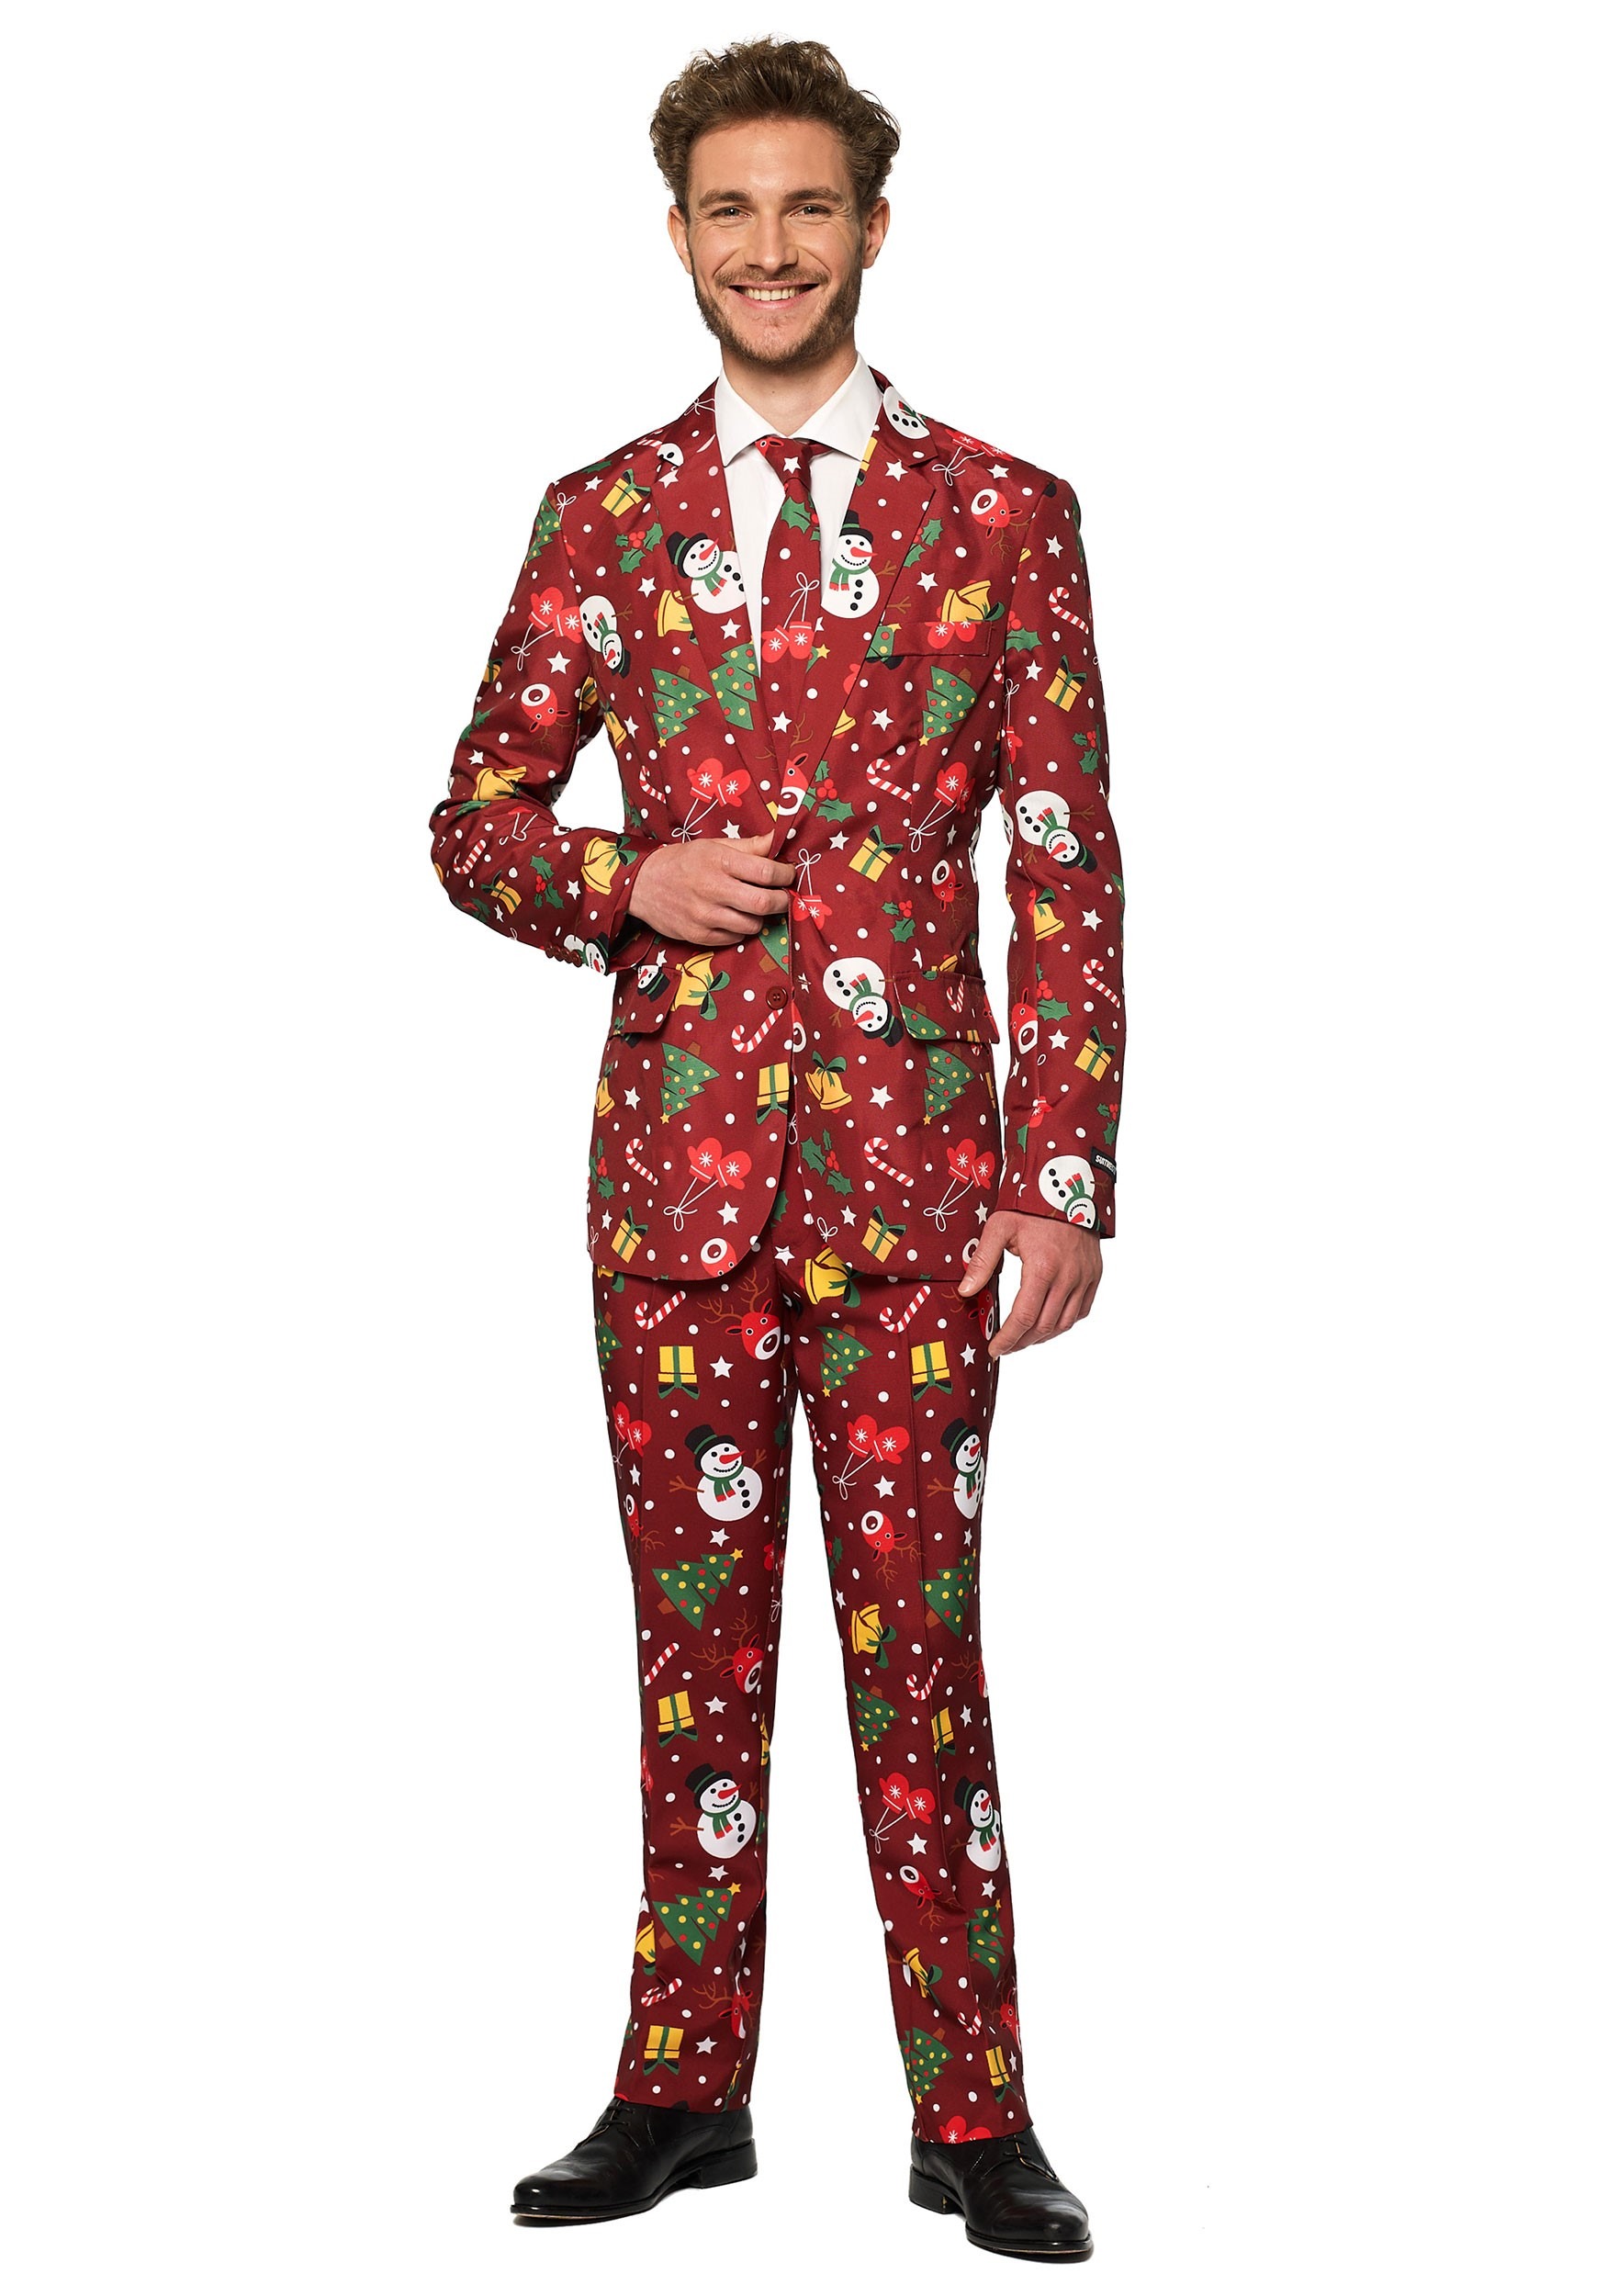 Ugly Xmas Sweater Costumes Include Jacket Pants & Tie Suitmeister Light-Up Christmas Suits for Men in Different Prints